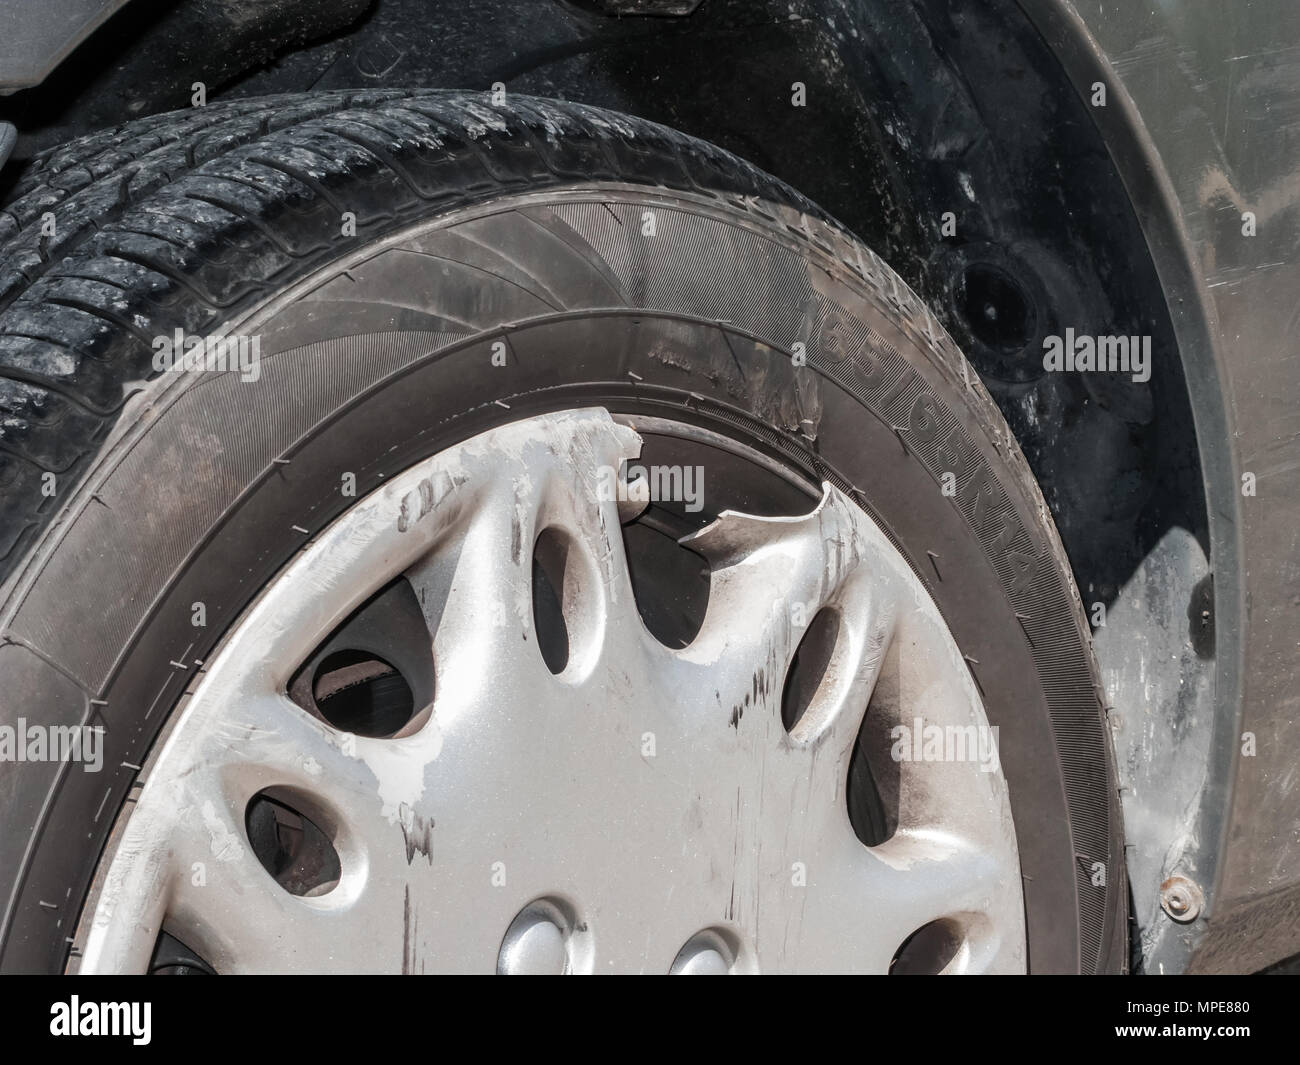 Hubcap damaged, broken and scratched from an automobile accident. Plastic cover for a steel wheel of a car. Close up detail. Tire dimensions not subje Stock Photo